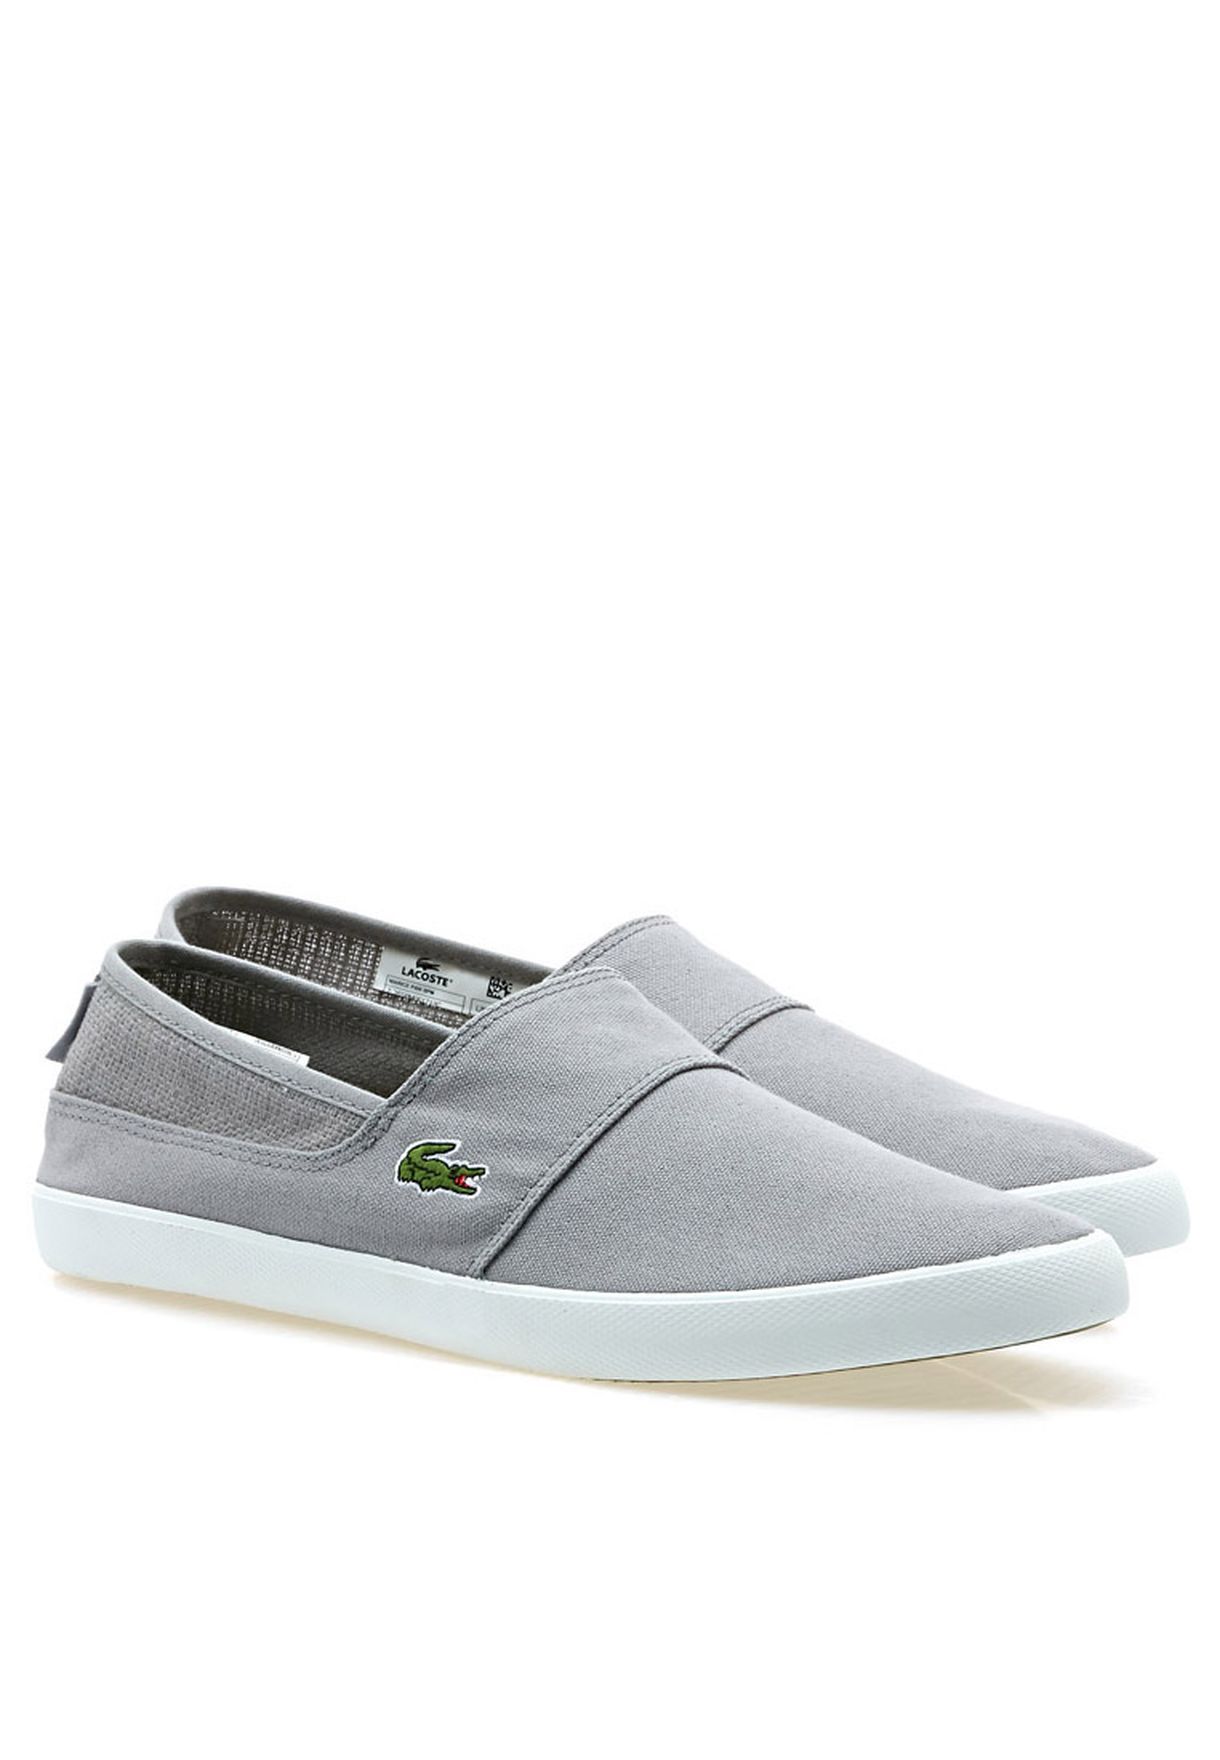 Lacoste grey MARICE PARCasual Slip ons 